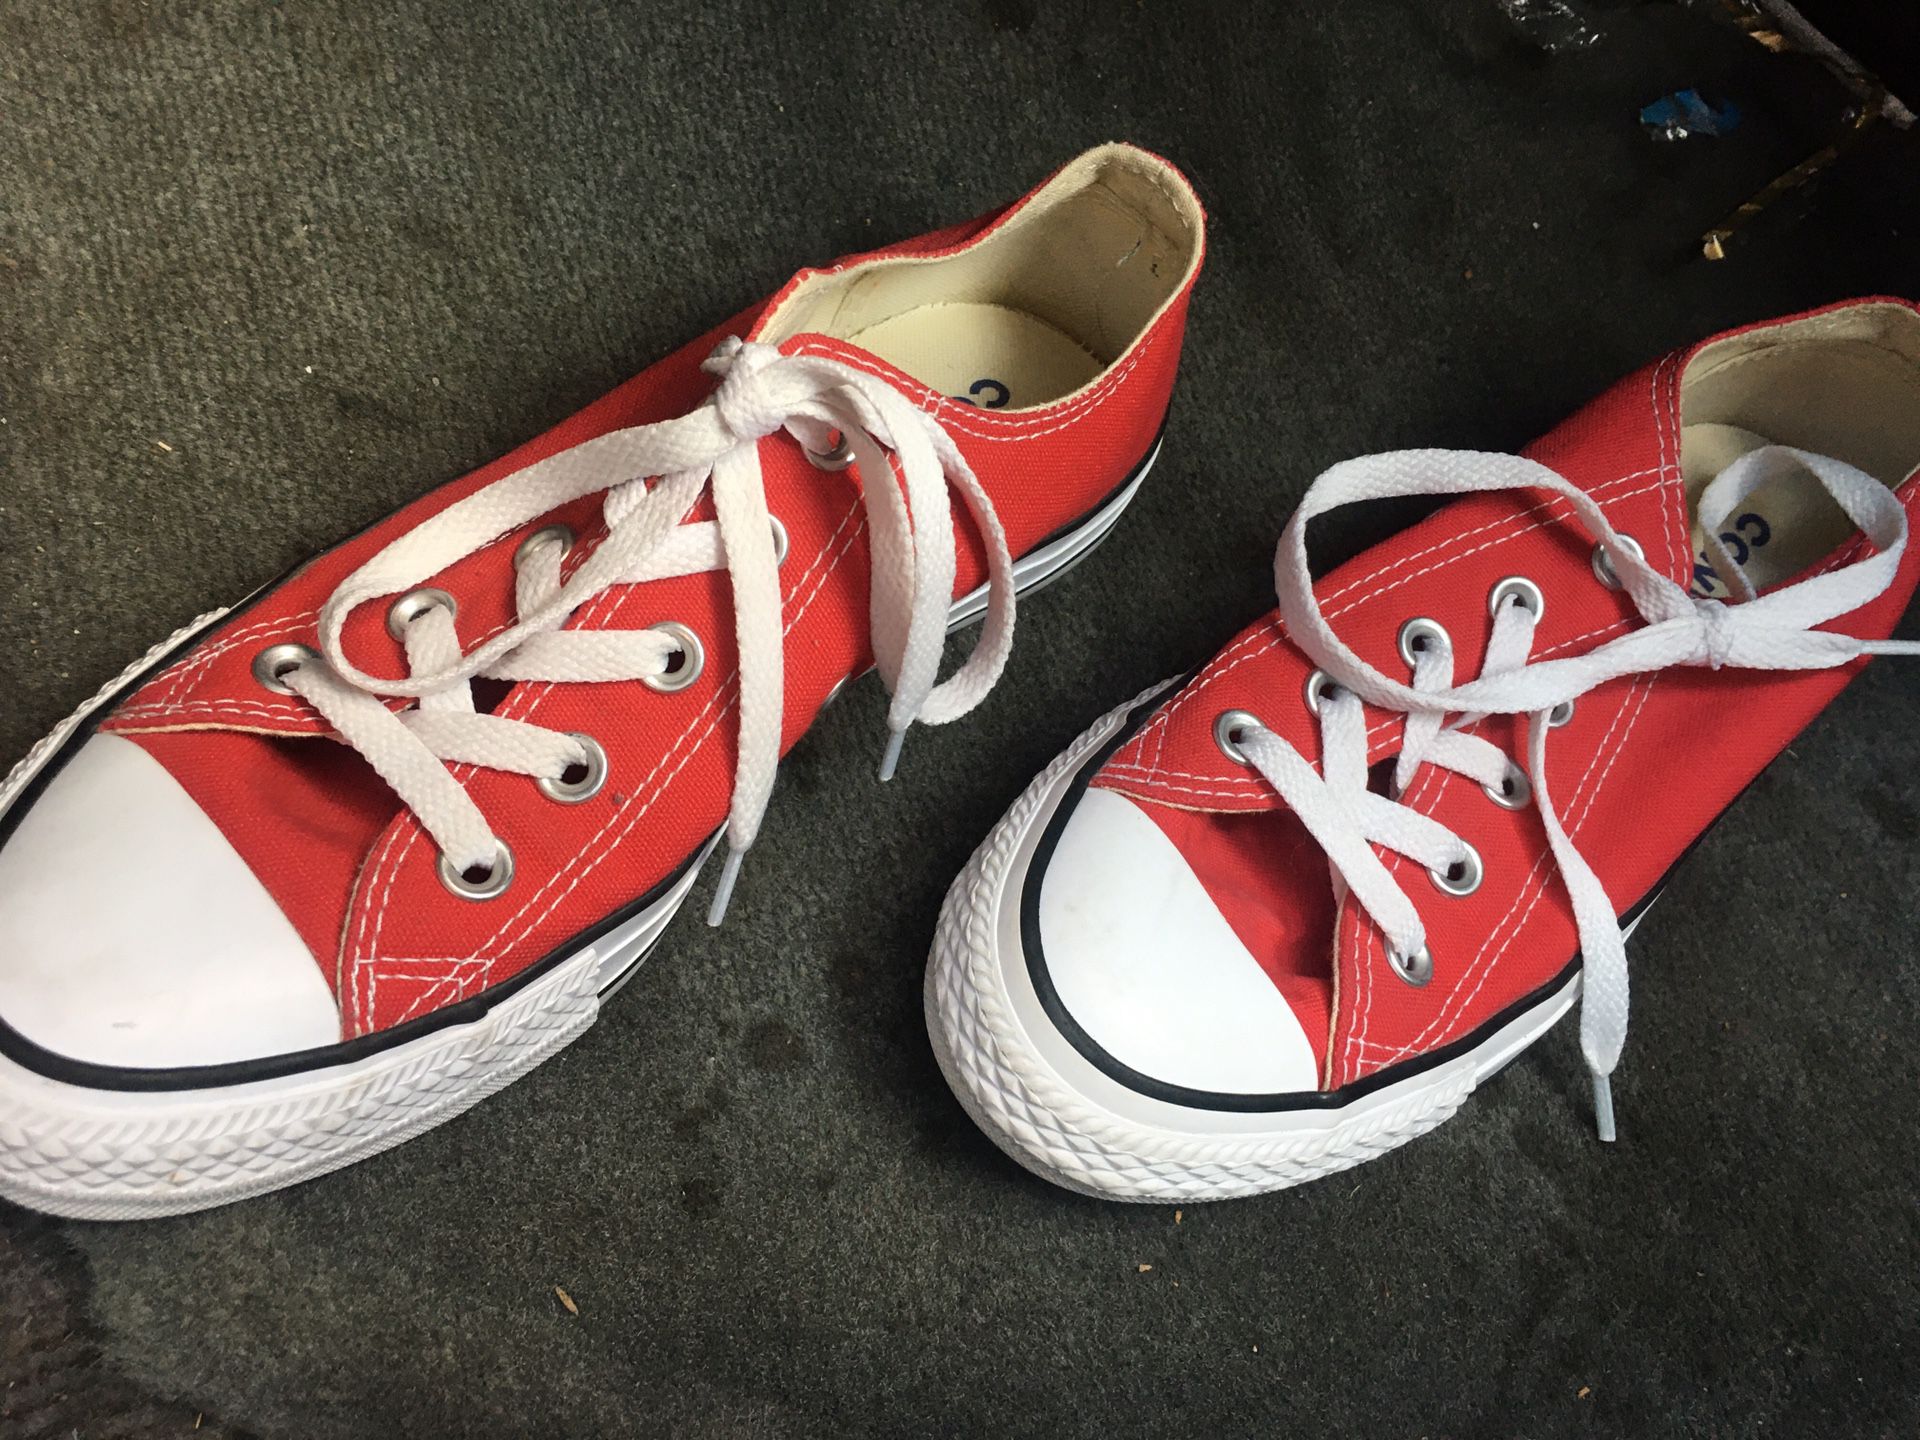 Women’s Size 6 Red Converse